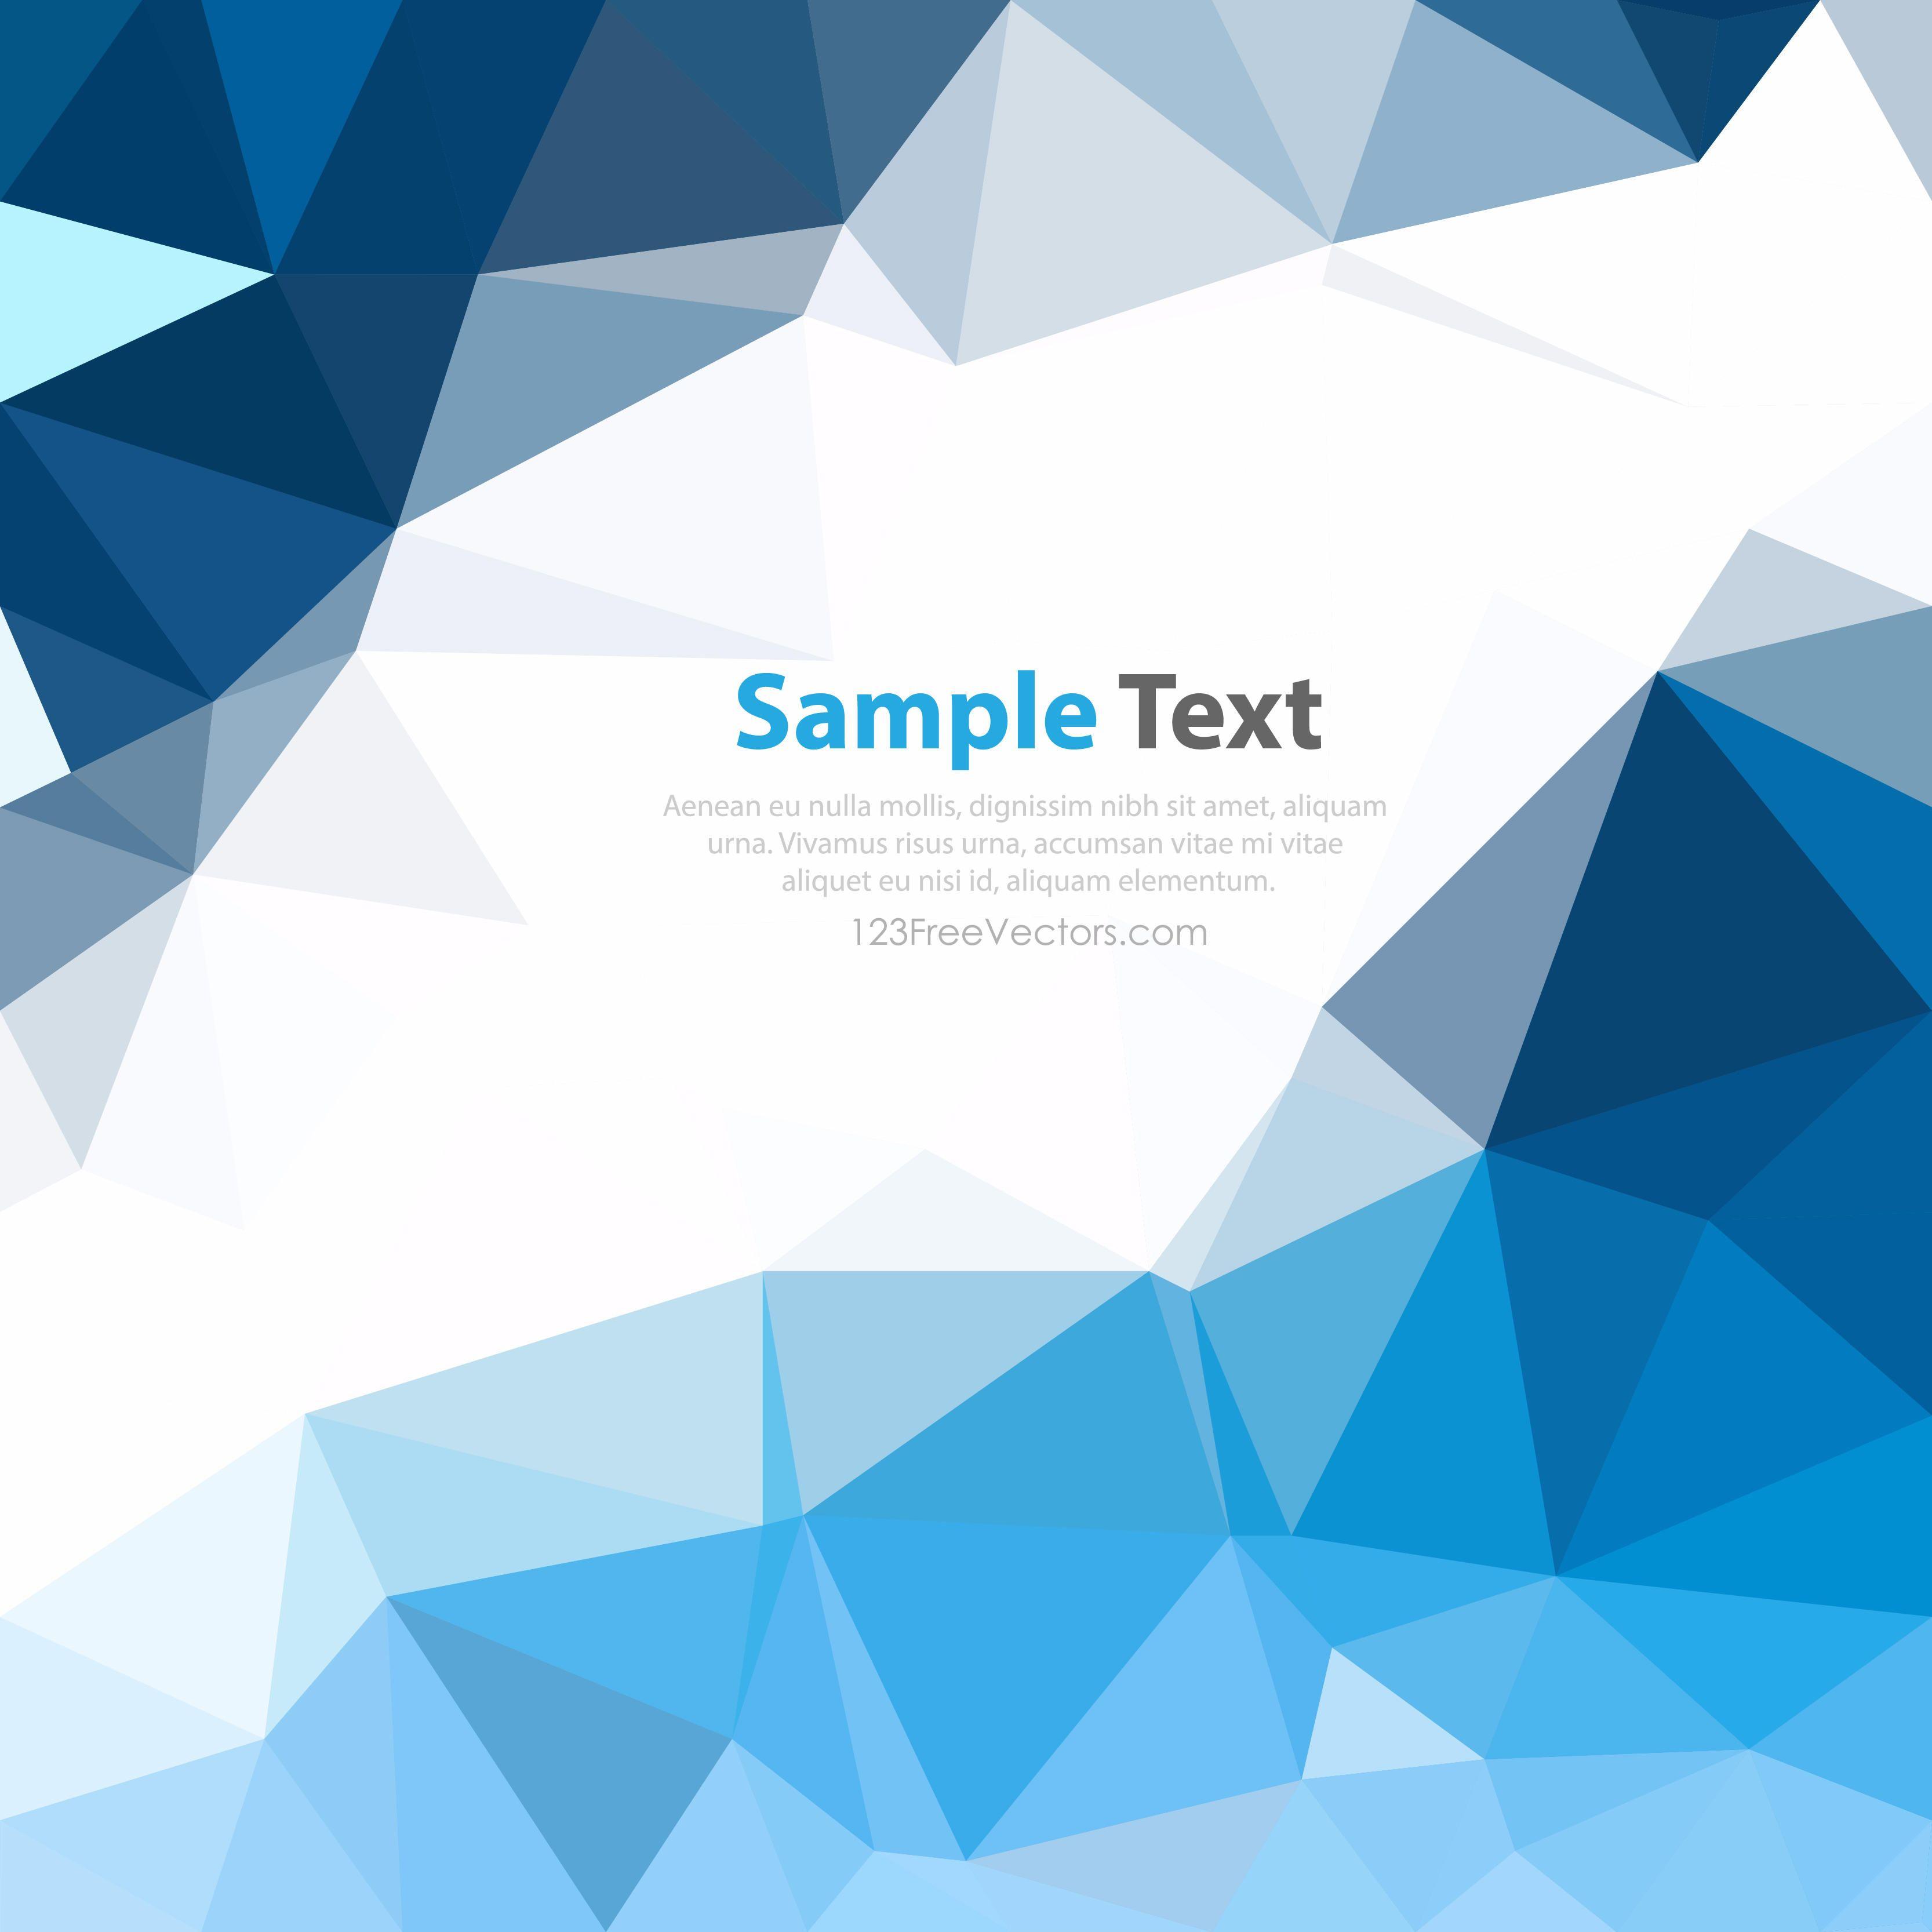 Blue Polygonal Triangular Background GraphicsFreevectors